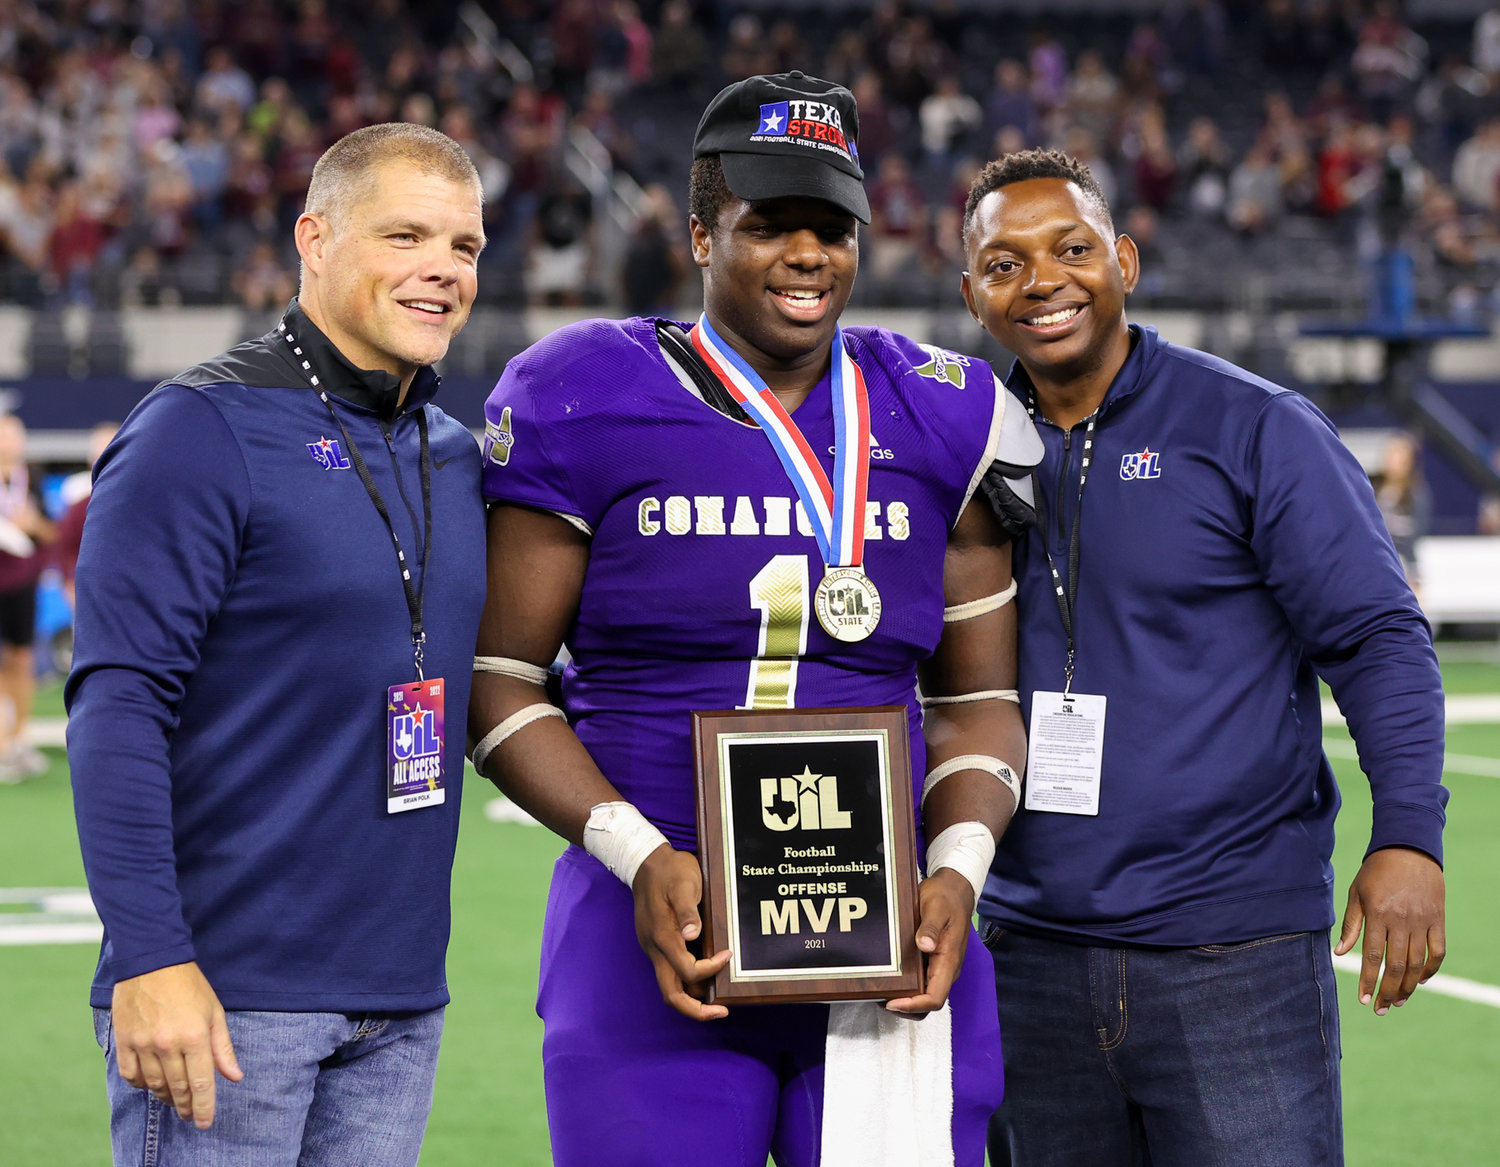 Shiner Comanches senior Doug Brooks (1) was named offensive MVP of the Class 2A Division I state football championship game between Shiner and Hawley on December 15, 2021 in Arlington, Texas. Shiner won 47-12 and Brooks carried the ball 16 times for 210 yards and two touchdowns.